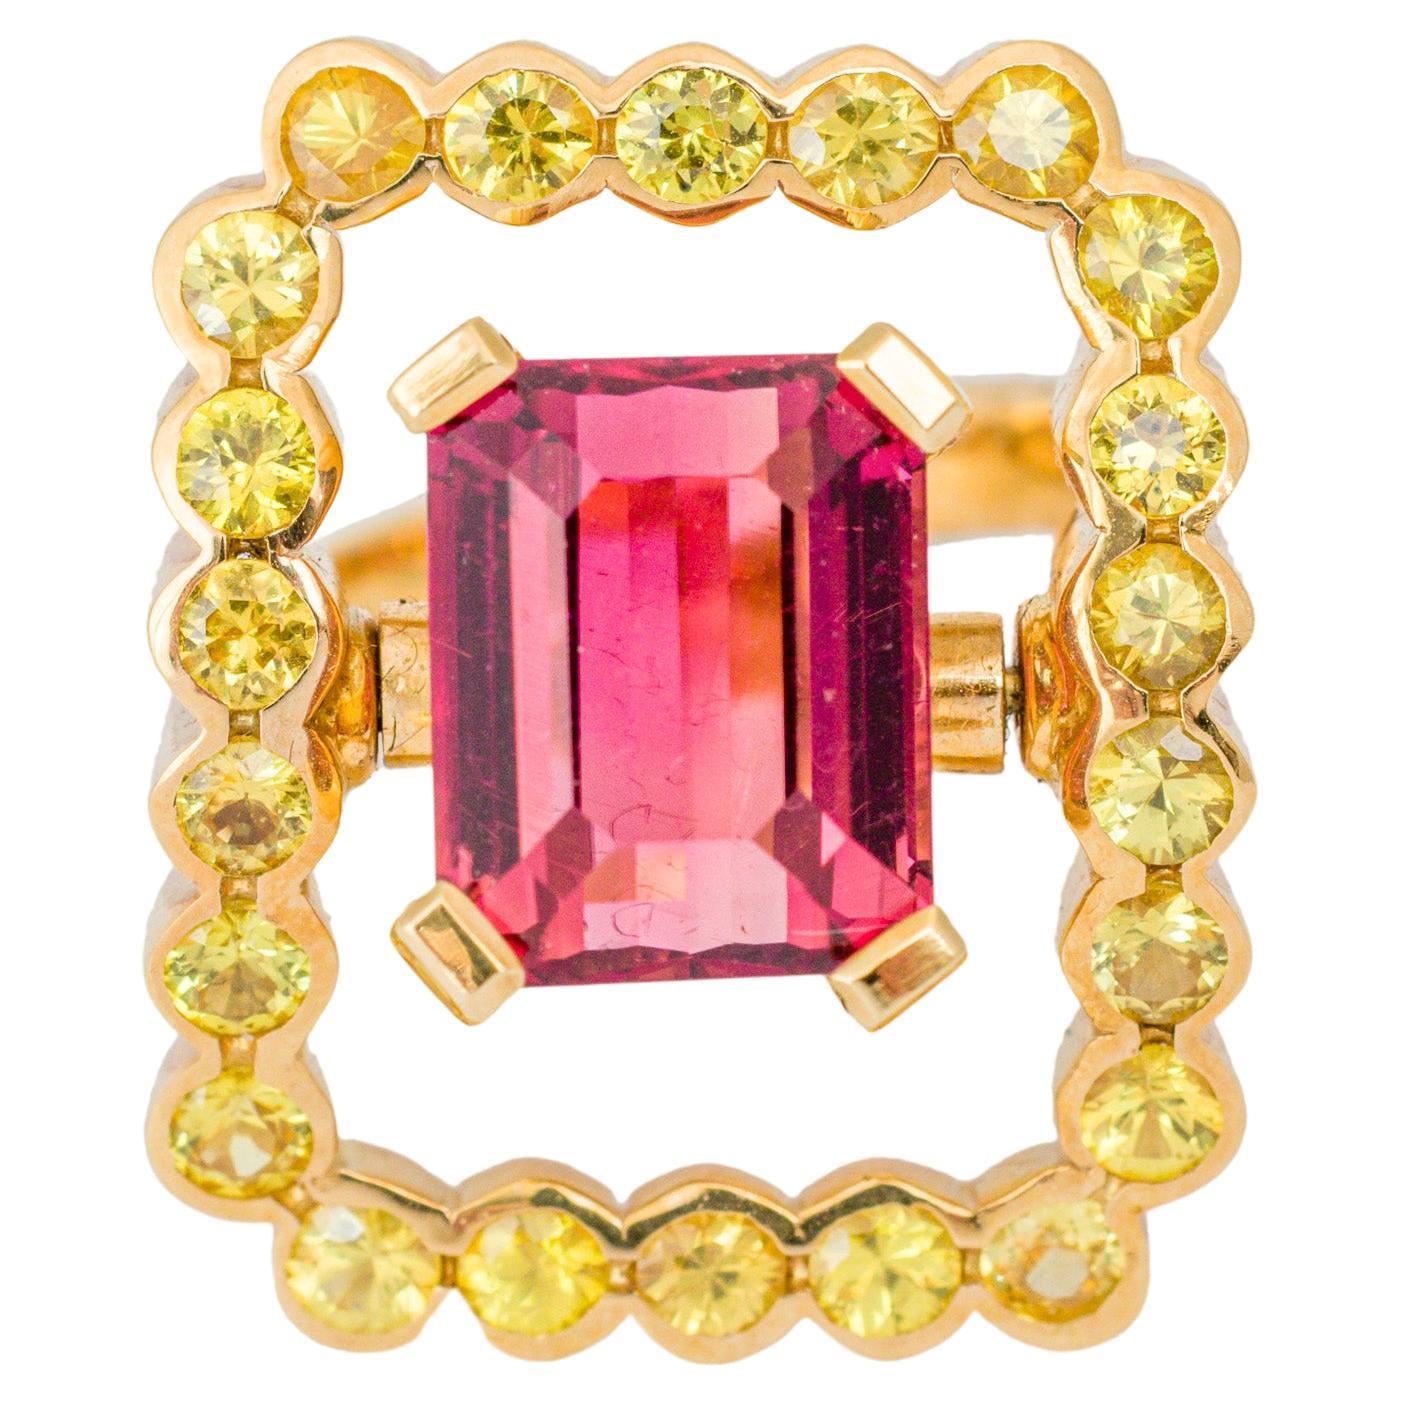 "Costis" Frame In Motion Ring with 8.22 carats Rubellite and Yellow Sapphires For Sale